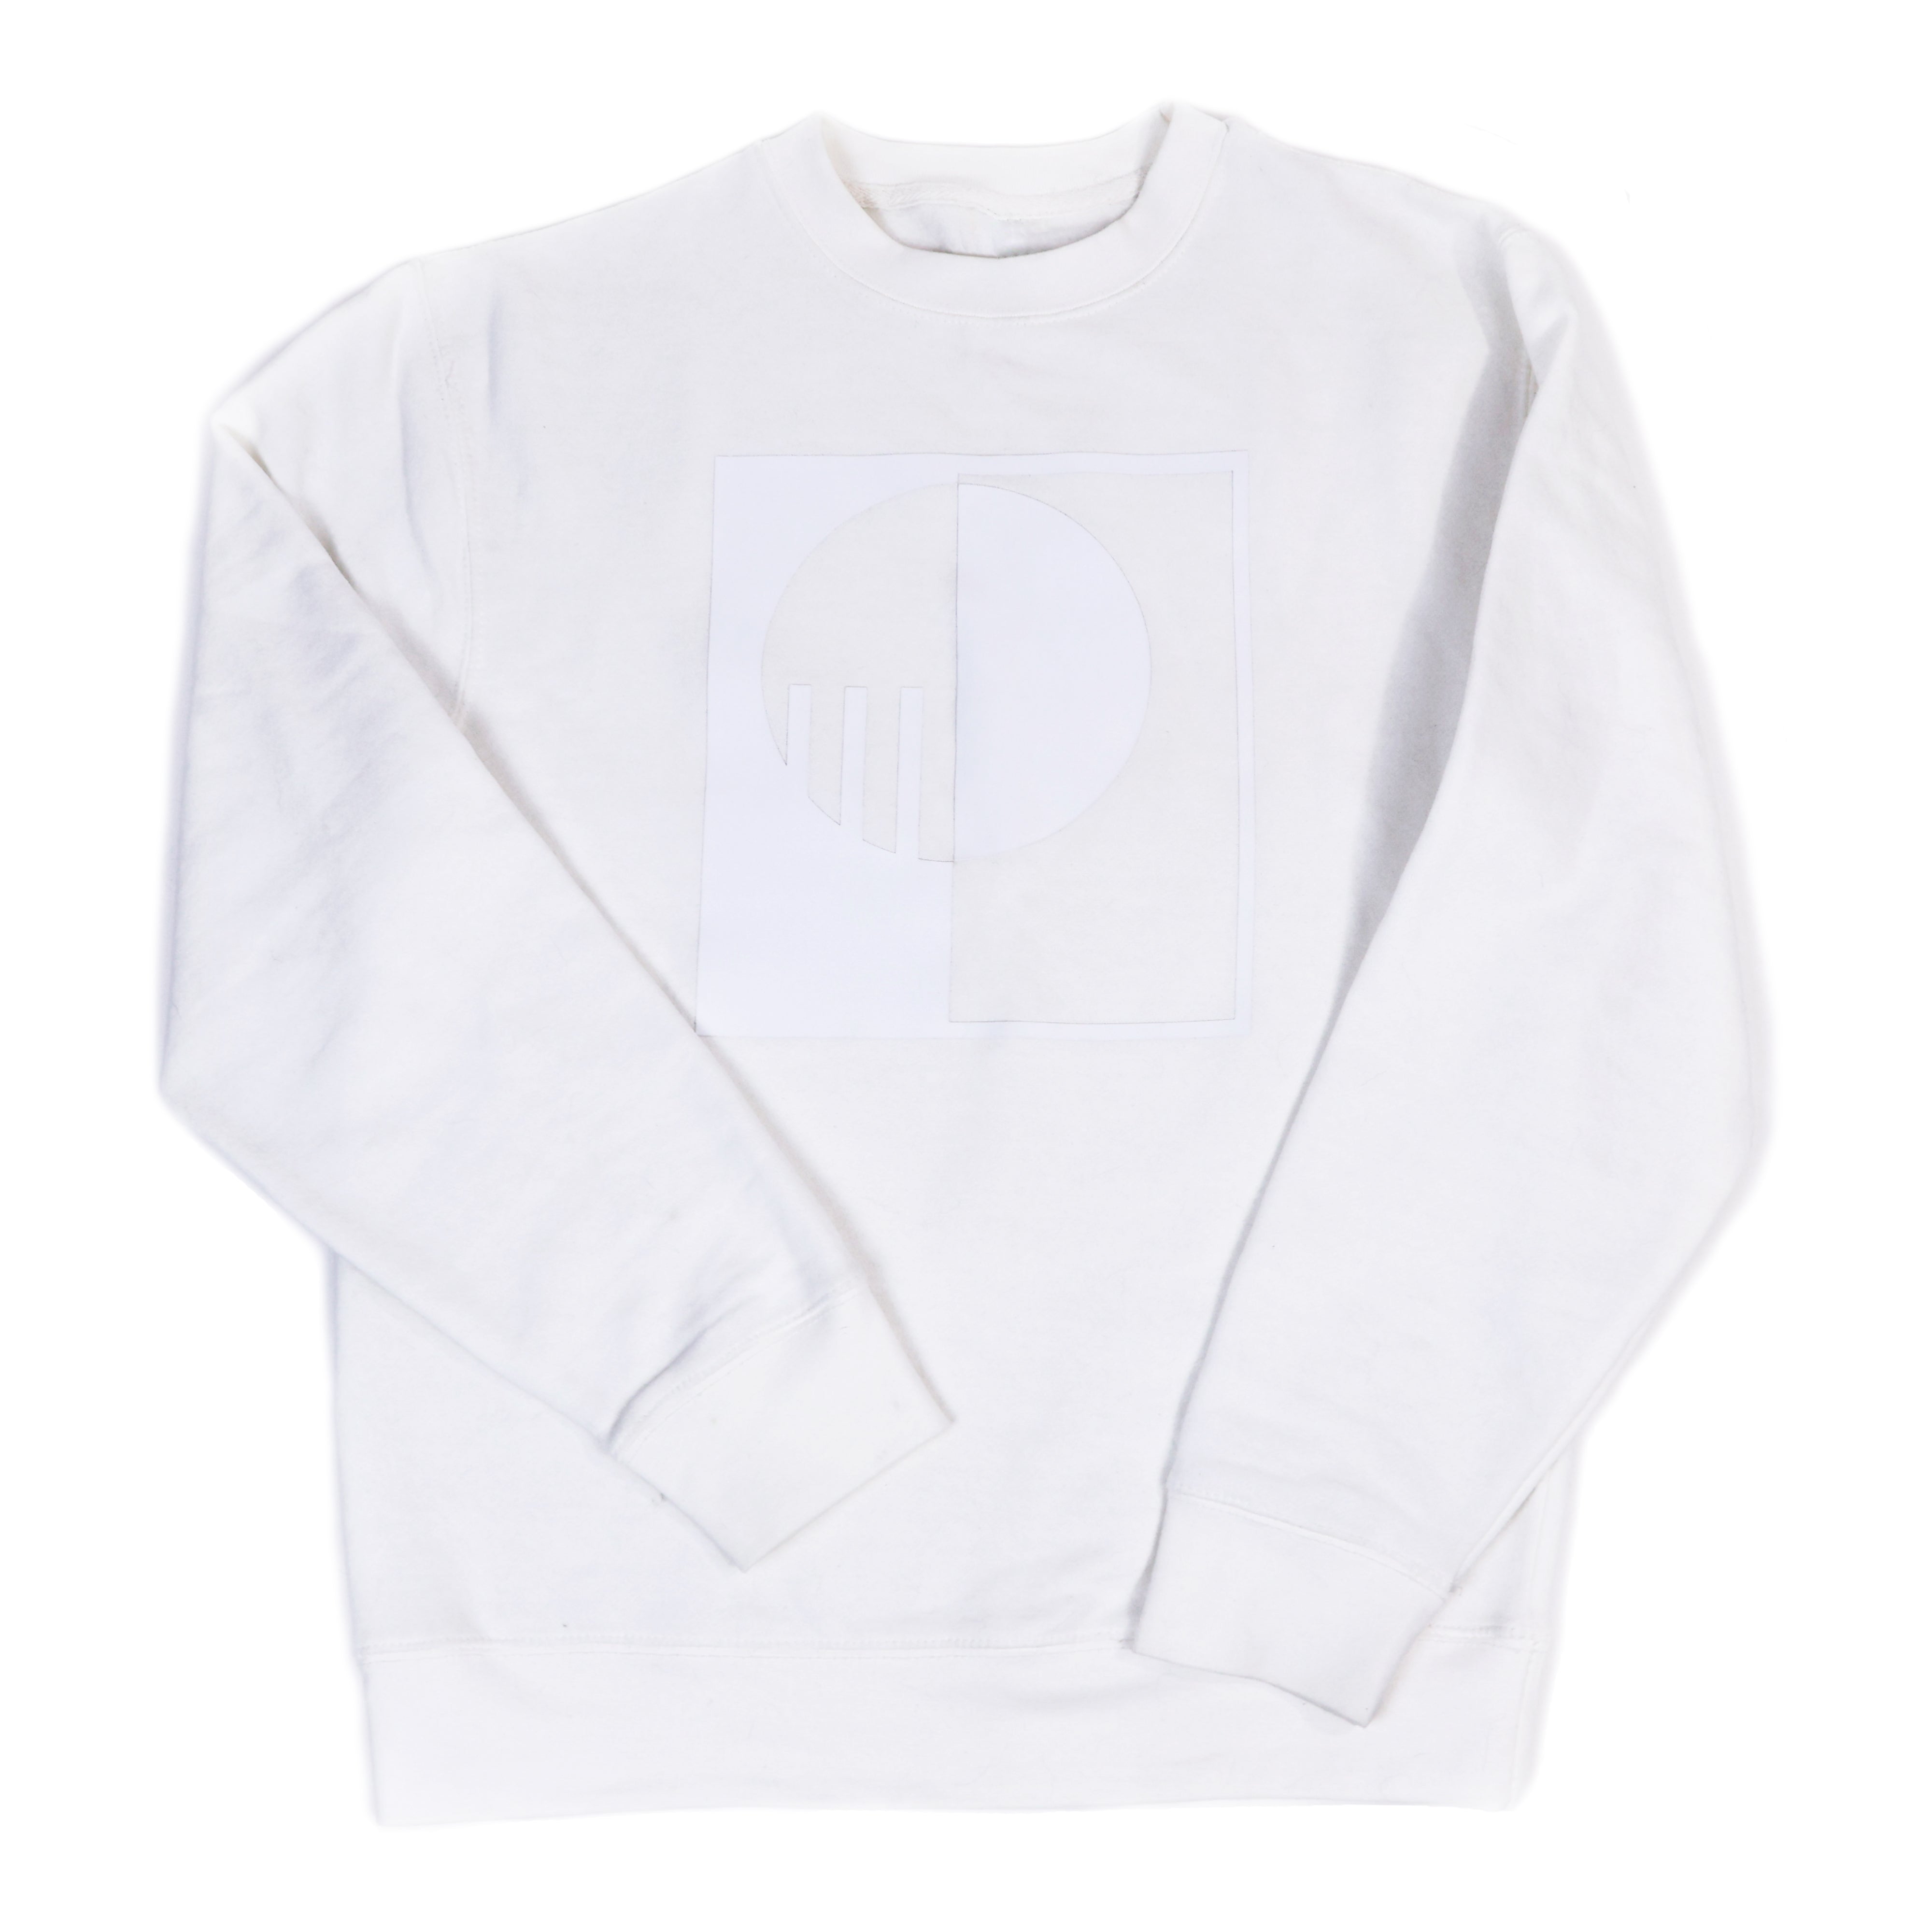 Sweatshirt | White - Projects Watches